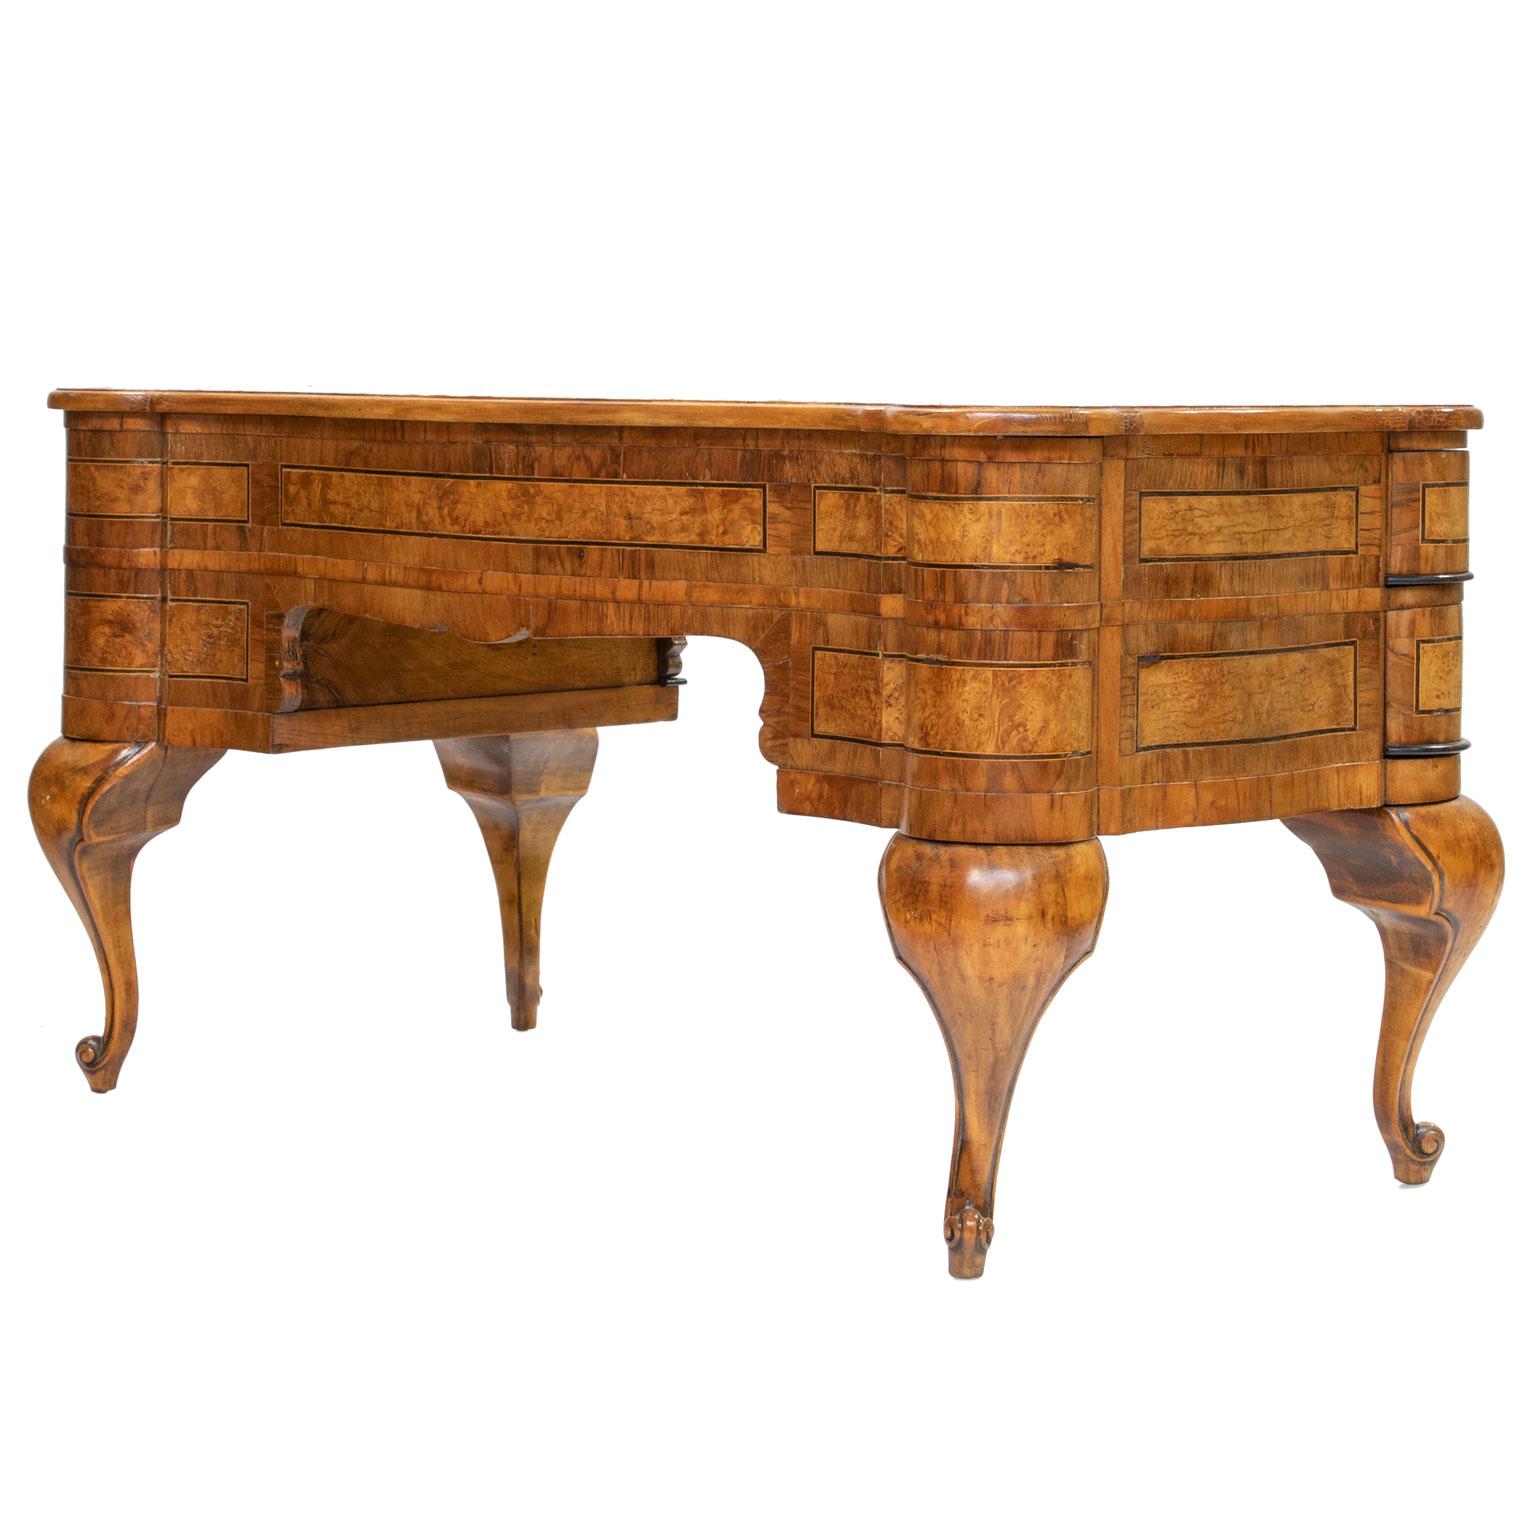 An early 20th century burl walnut writing desk from Italy. Shaped top and front. Shaped drawers (unique).